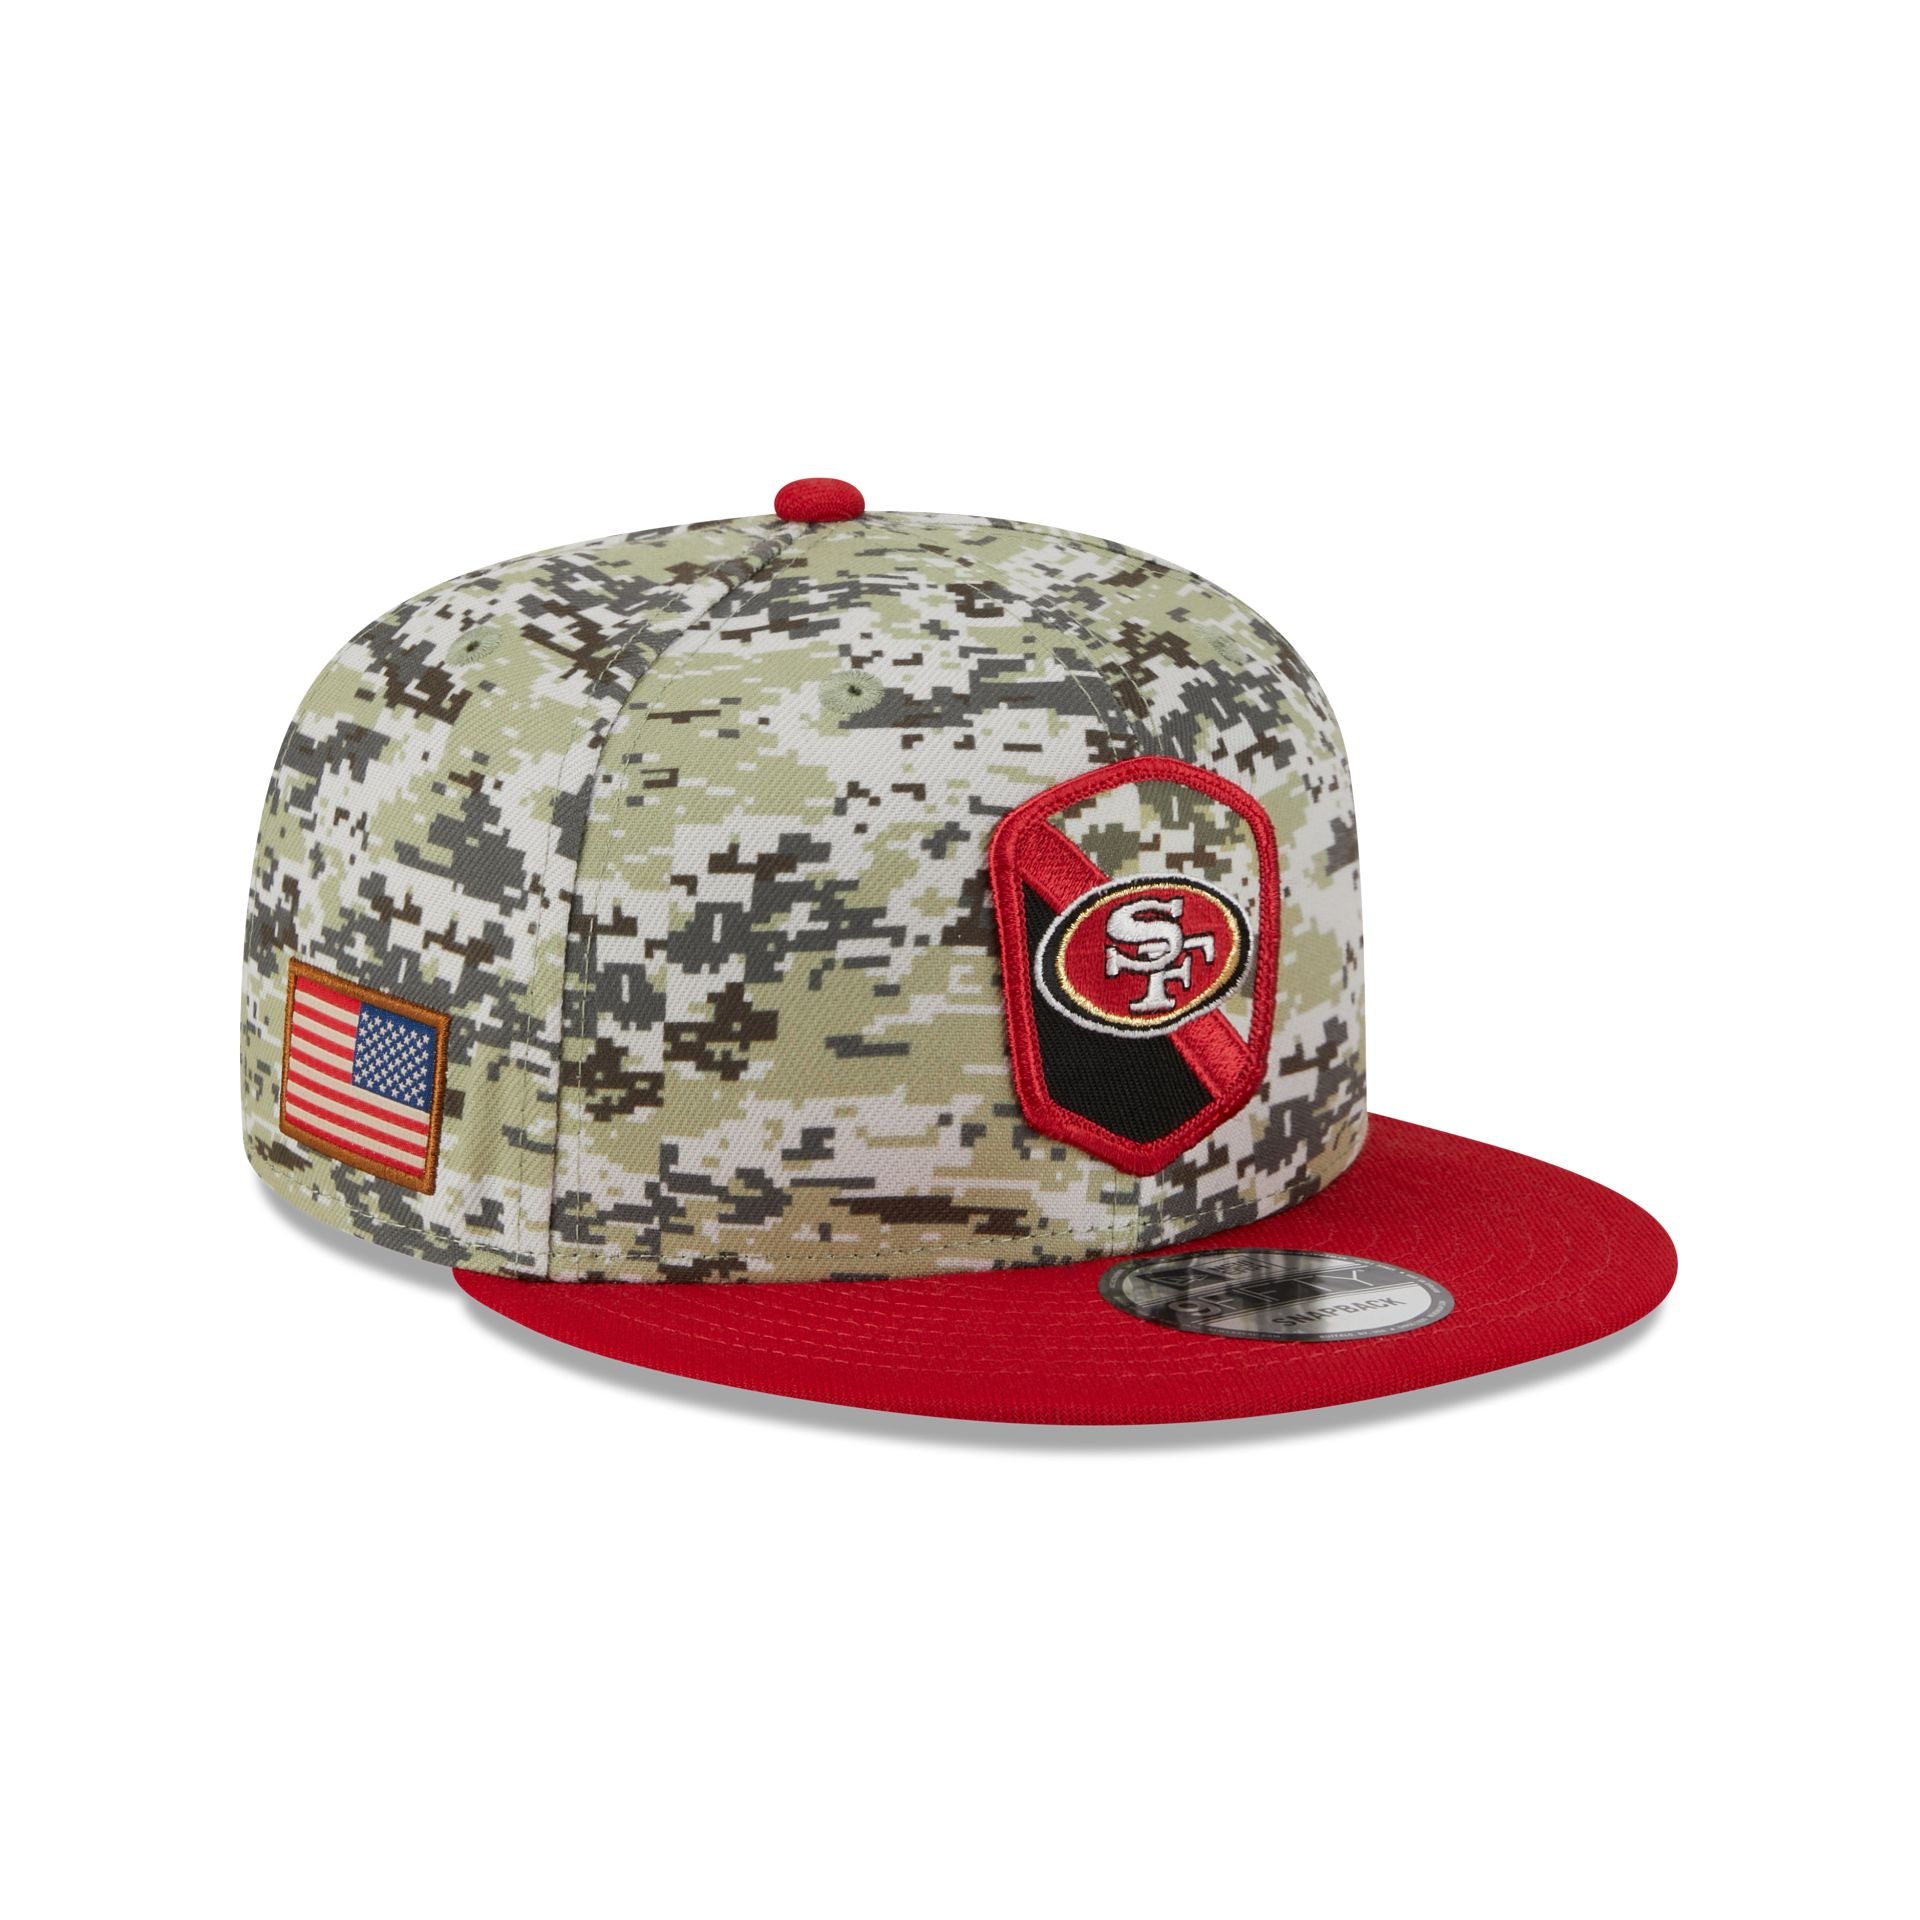 New Era 59Fifty San Francisco 49ers 1972 Word Hat - Red, Black